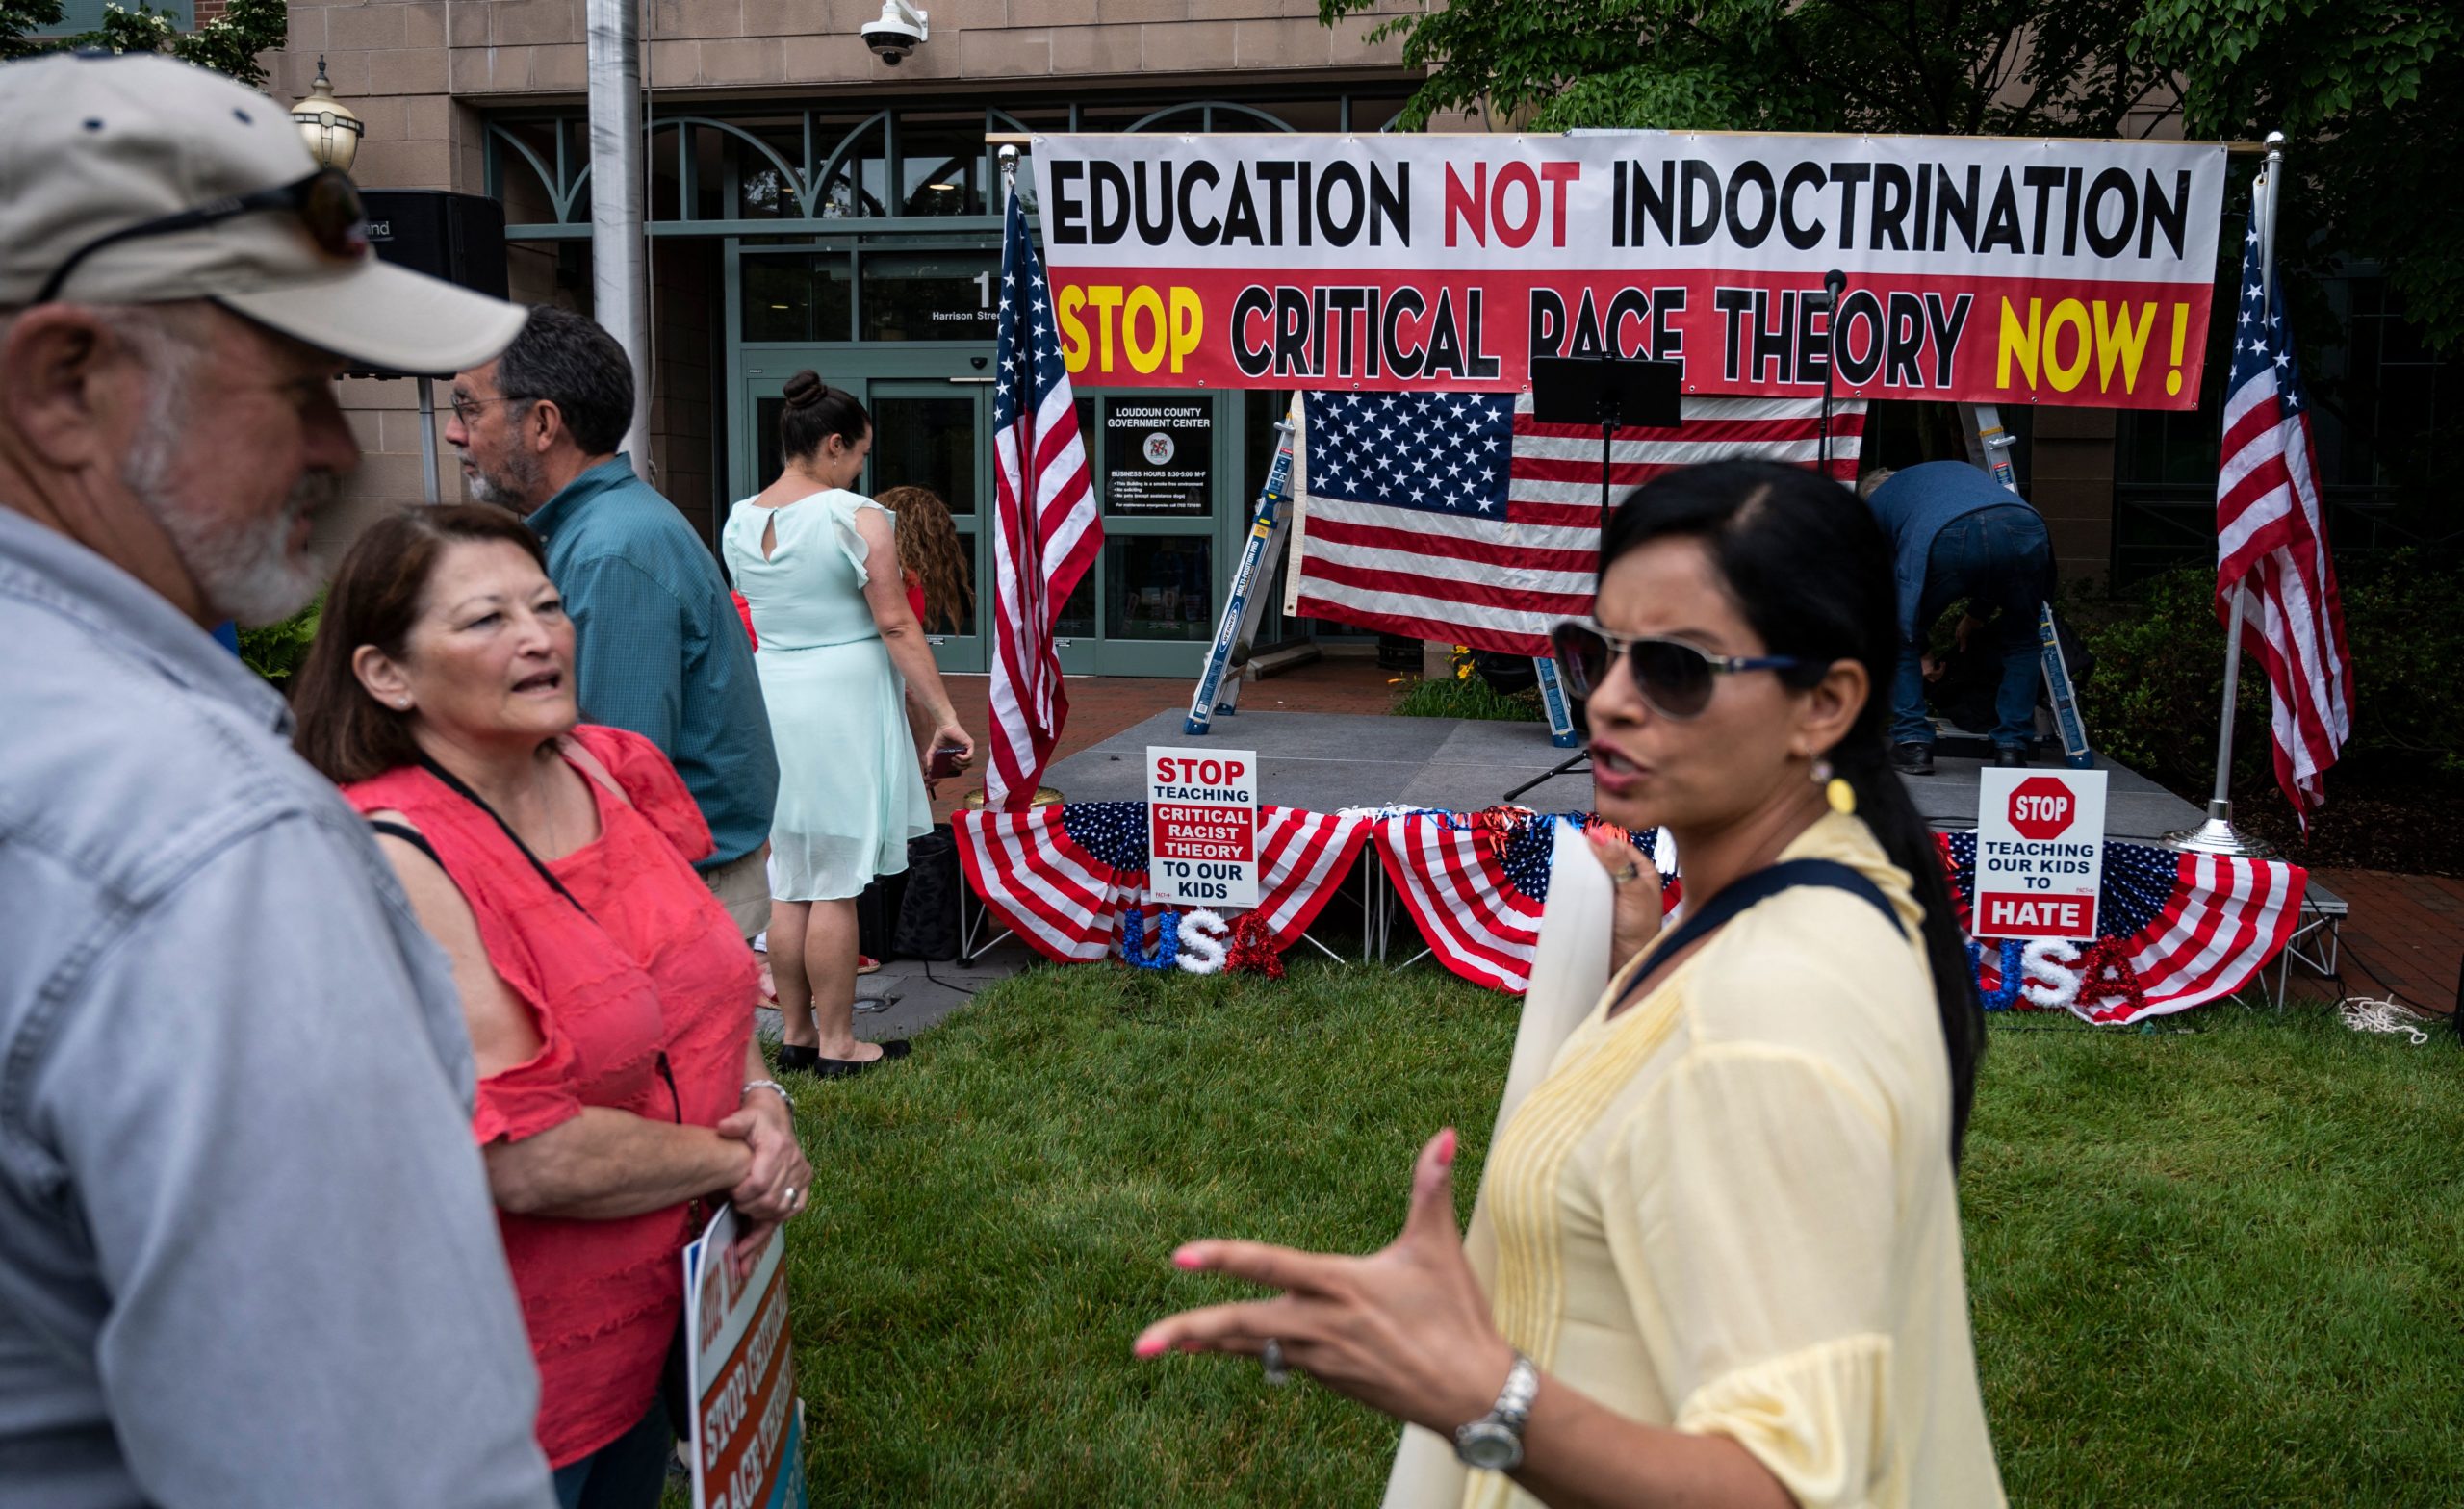 People talk before the start of a rally against "critical race theory" (CRT) being taught in schools at the Loudoun County Government center in Leesburg, Virginia on June 12, 2021. (Photo by ANDREW CABALLERO-REYNOLDS/AFP via Getty Images)